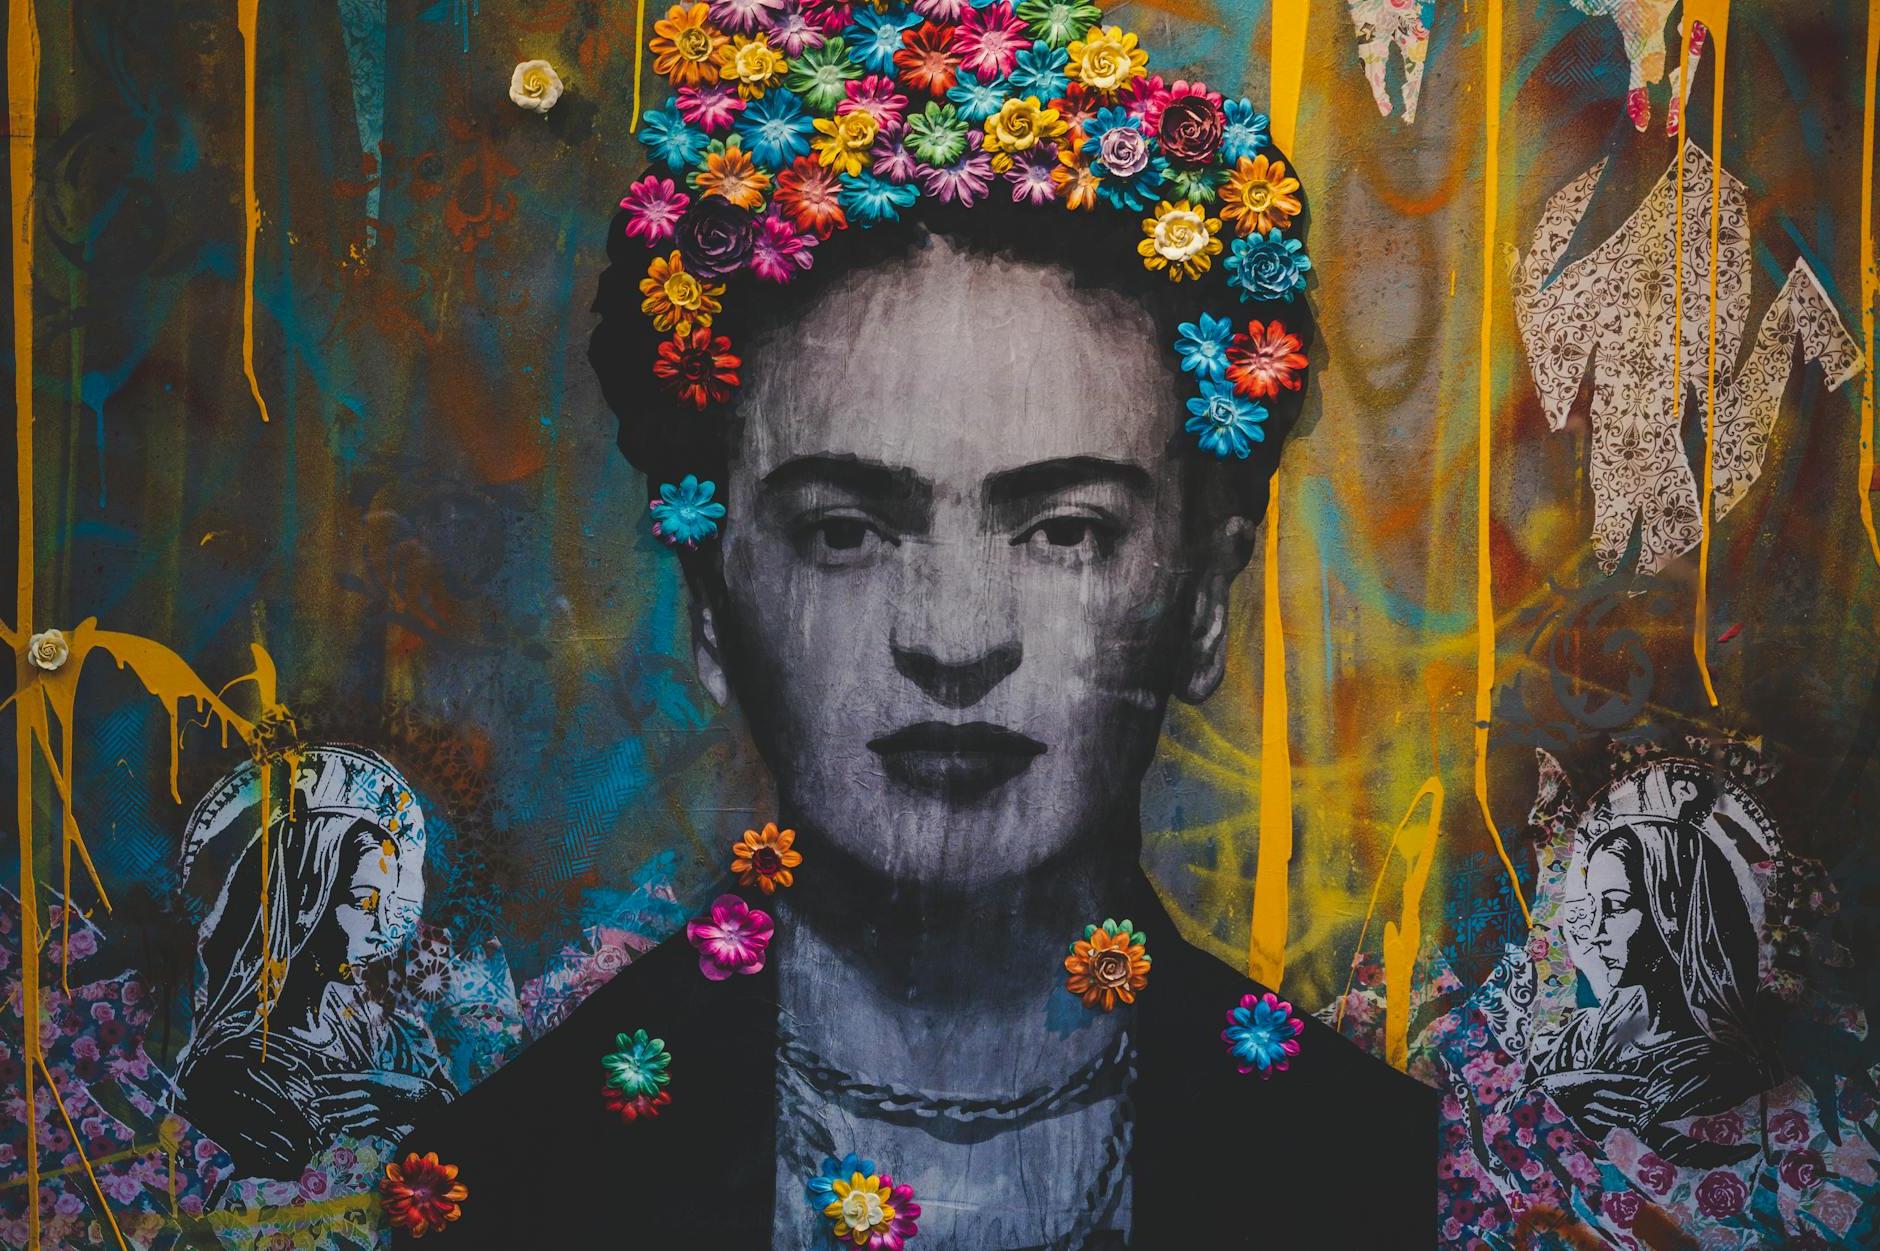 Creative artwork with Frida Kahlo painting decorated with colorful floral headband on graffiti wall